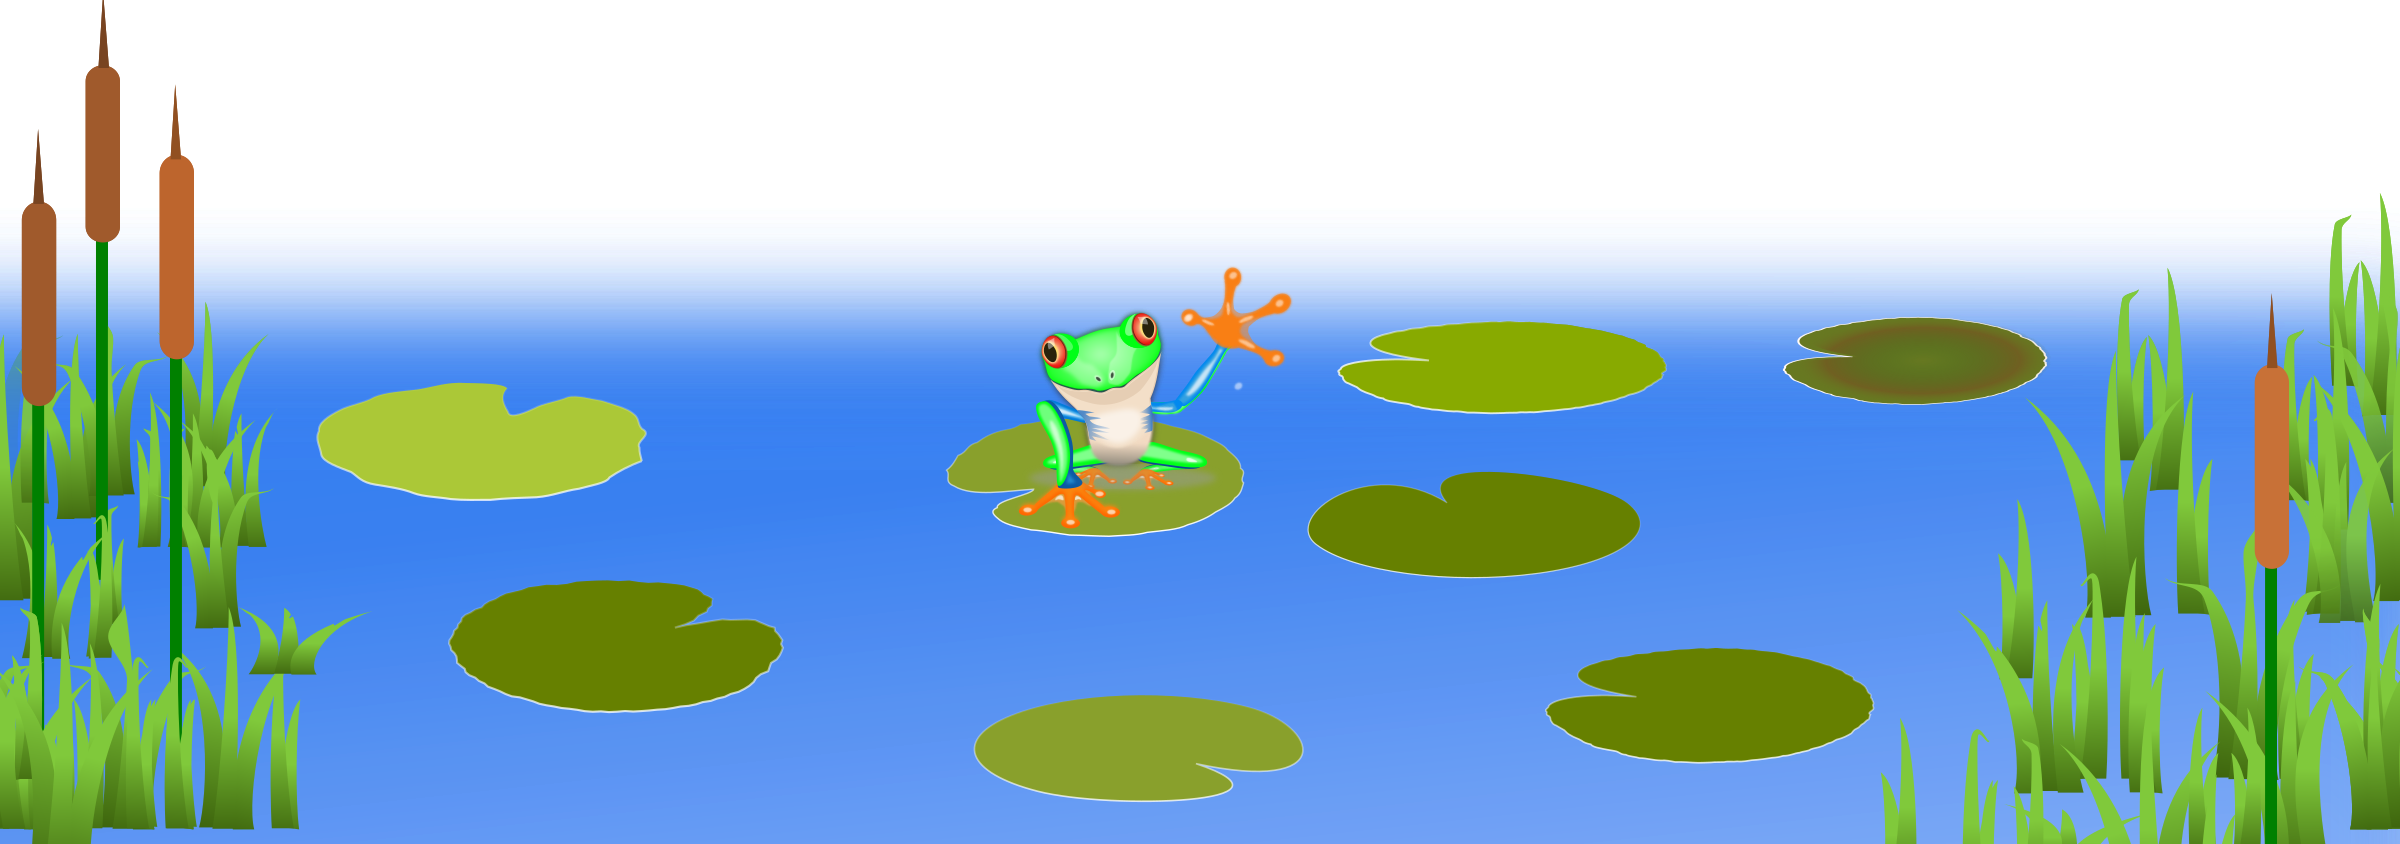 Swamp clipart free.